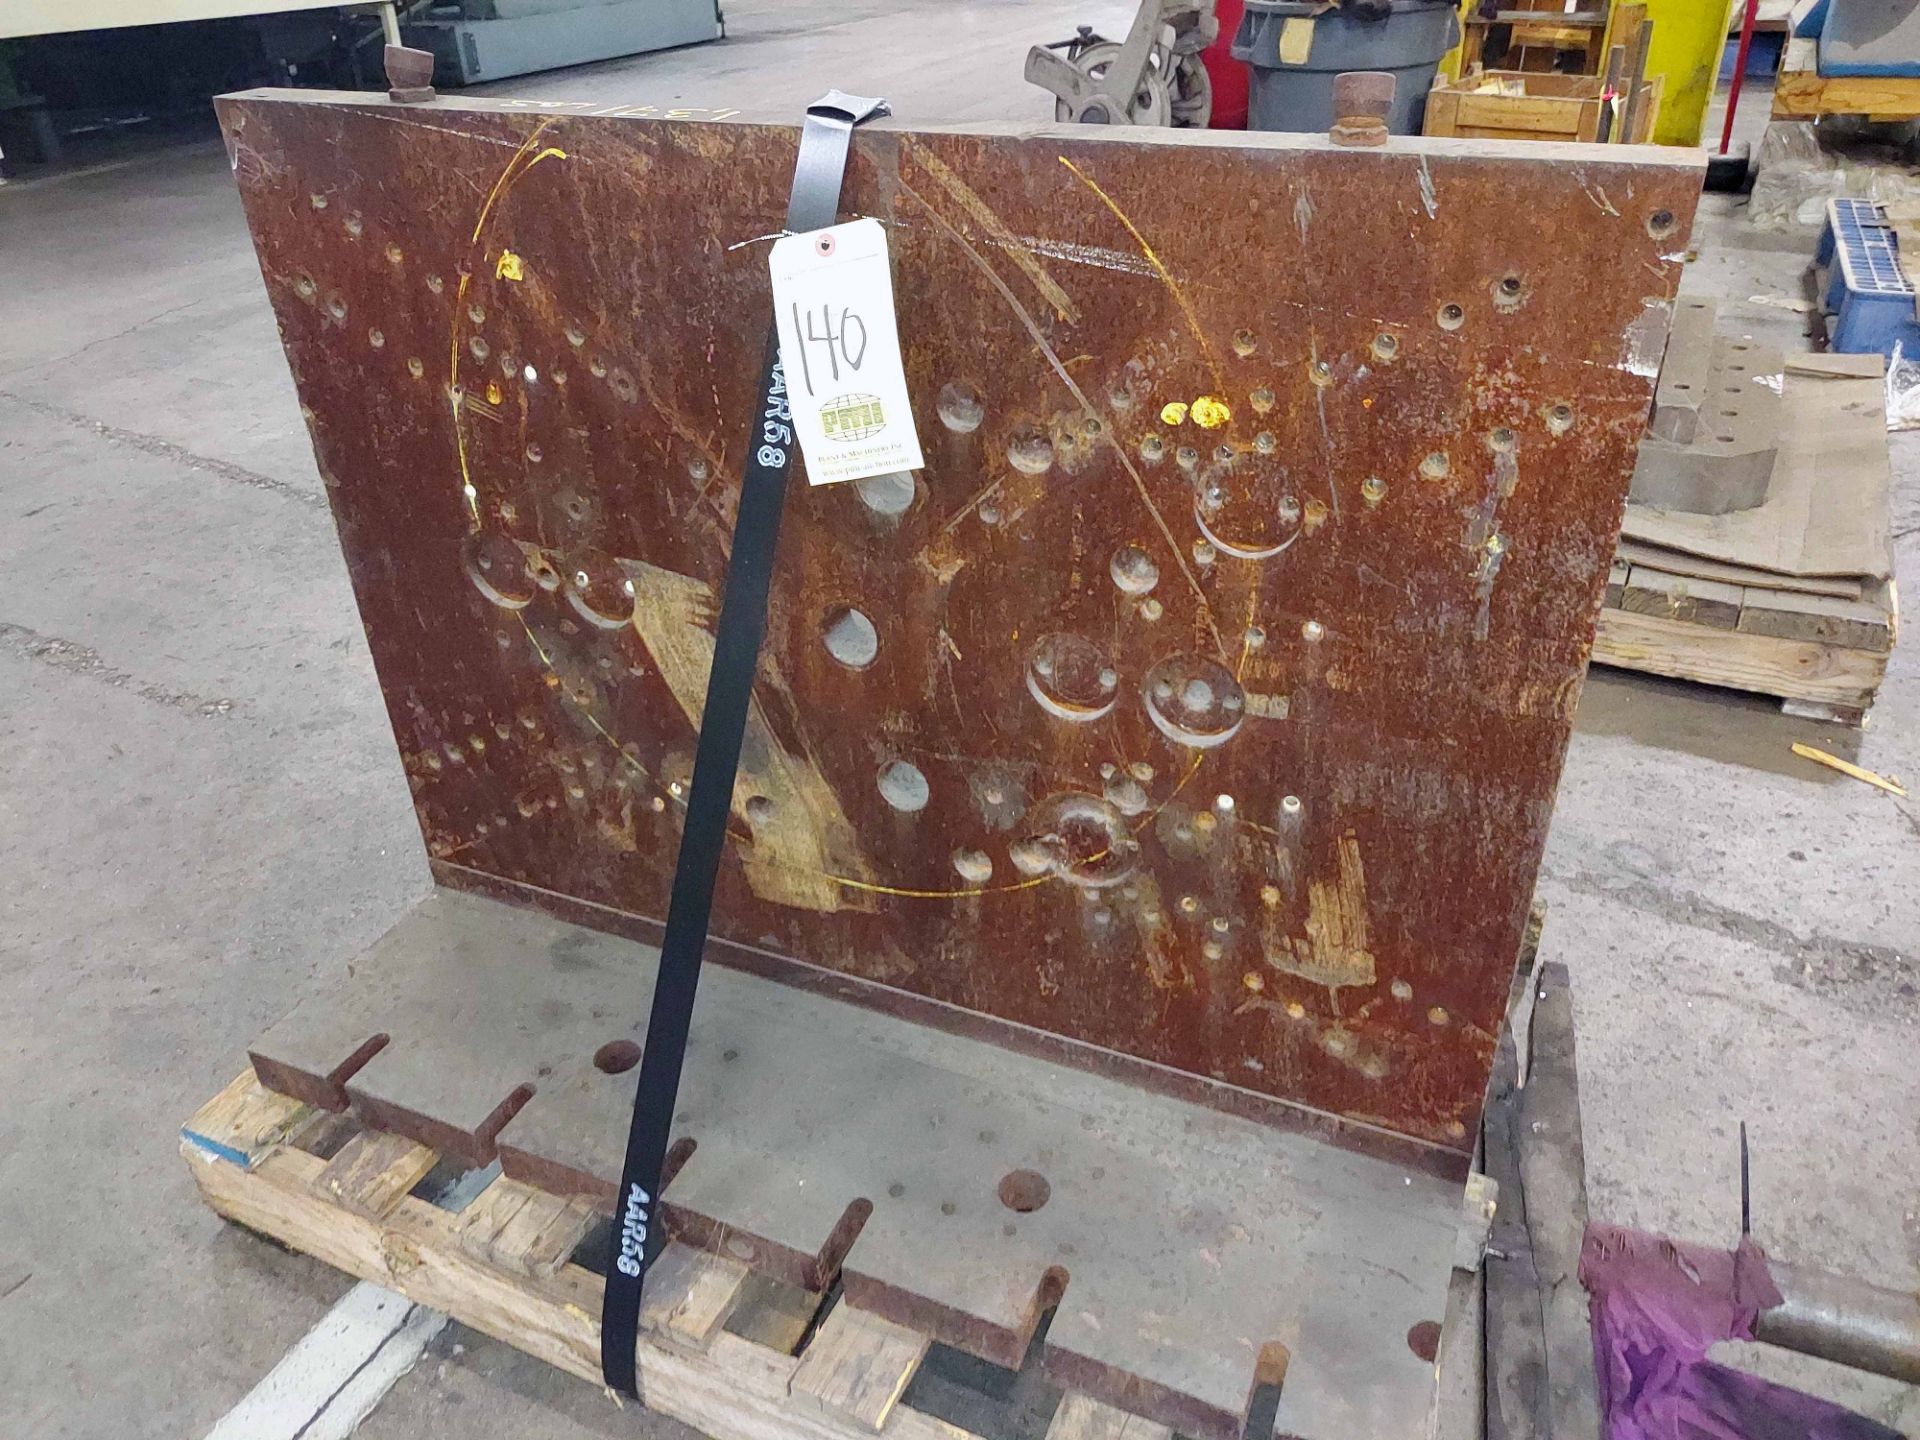 RIGHT ANGLE PLATE, MULLER, 3' x 2' x 2'